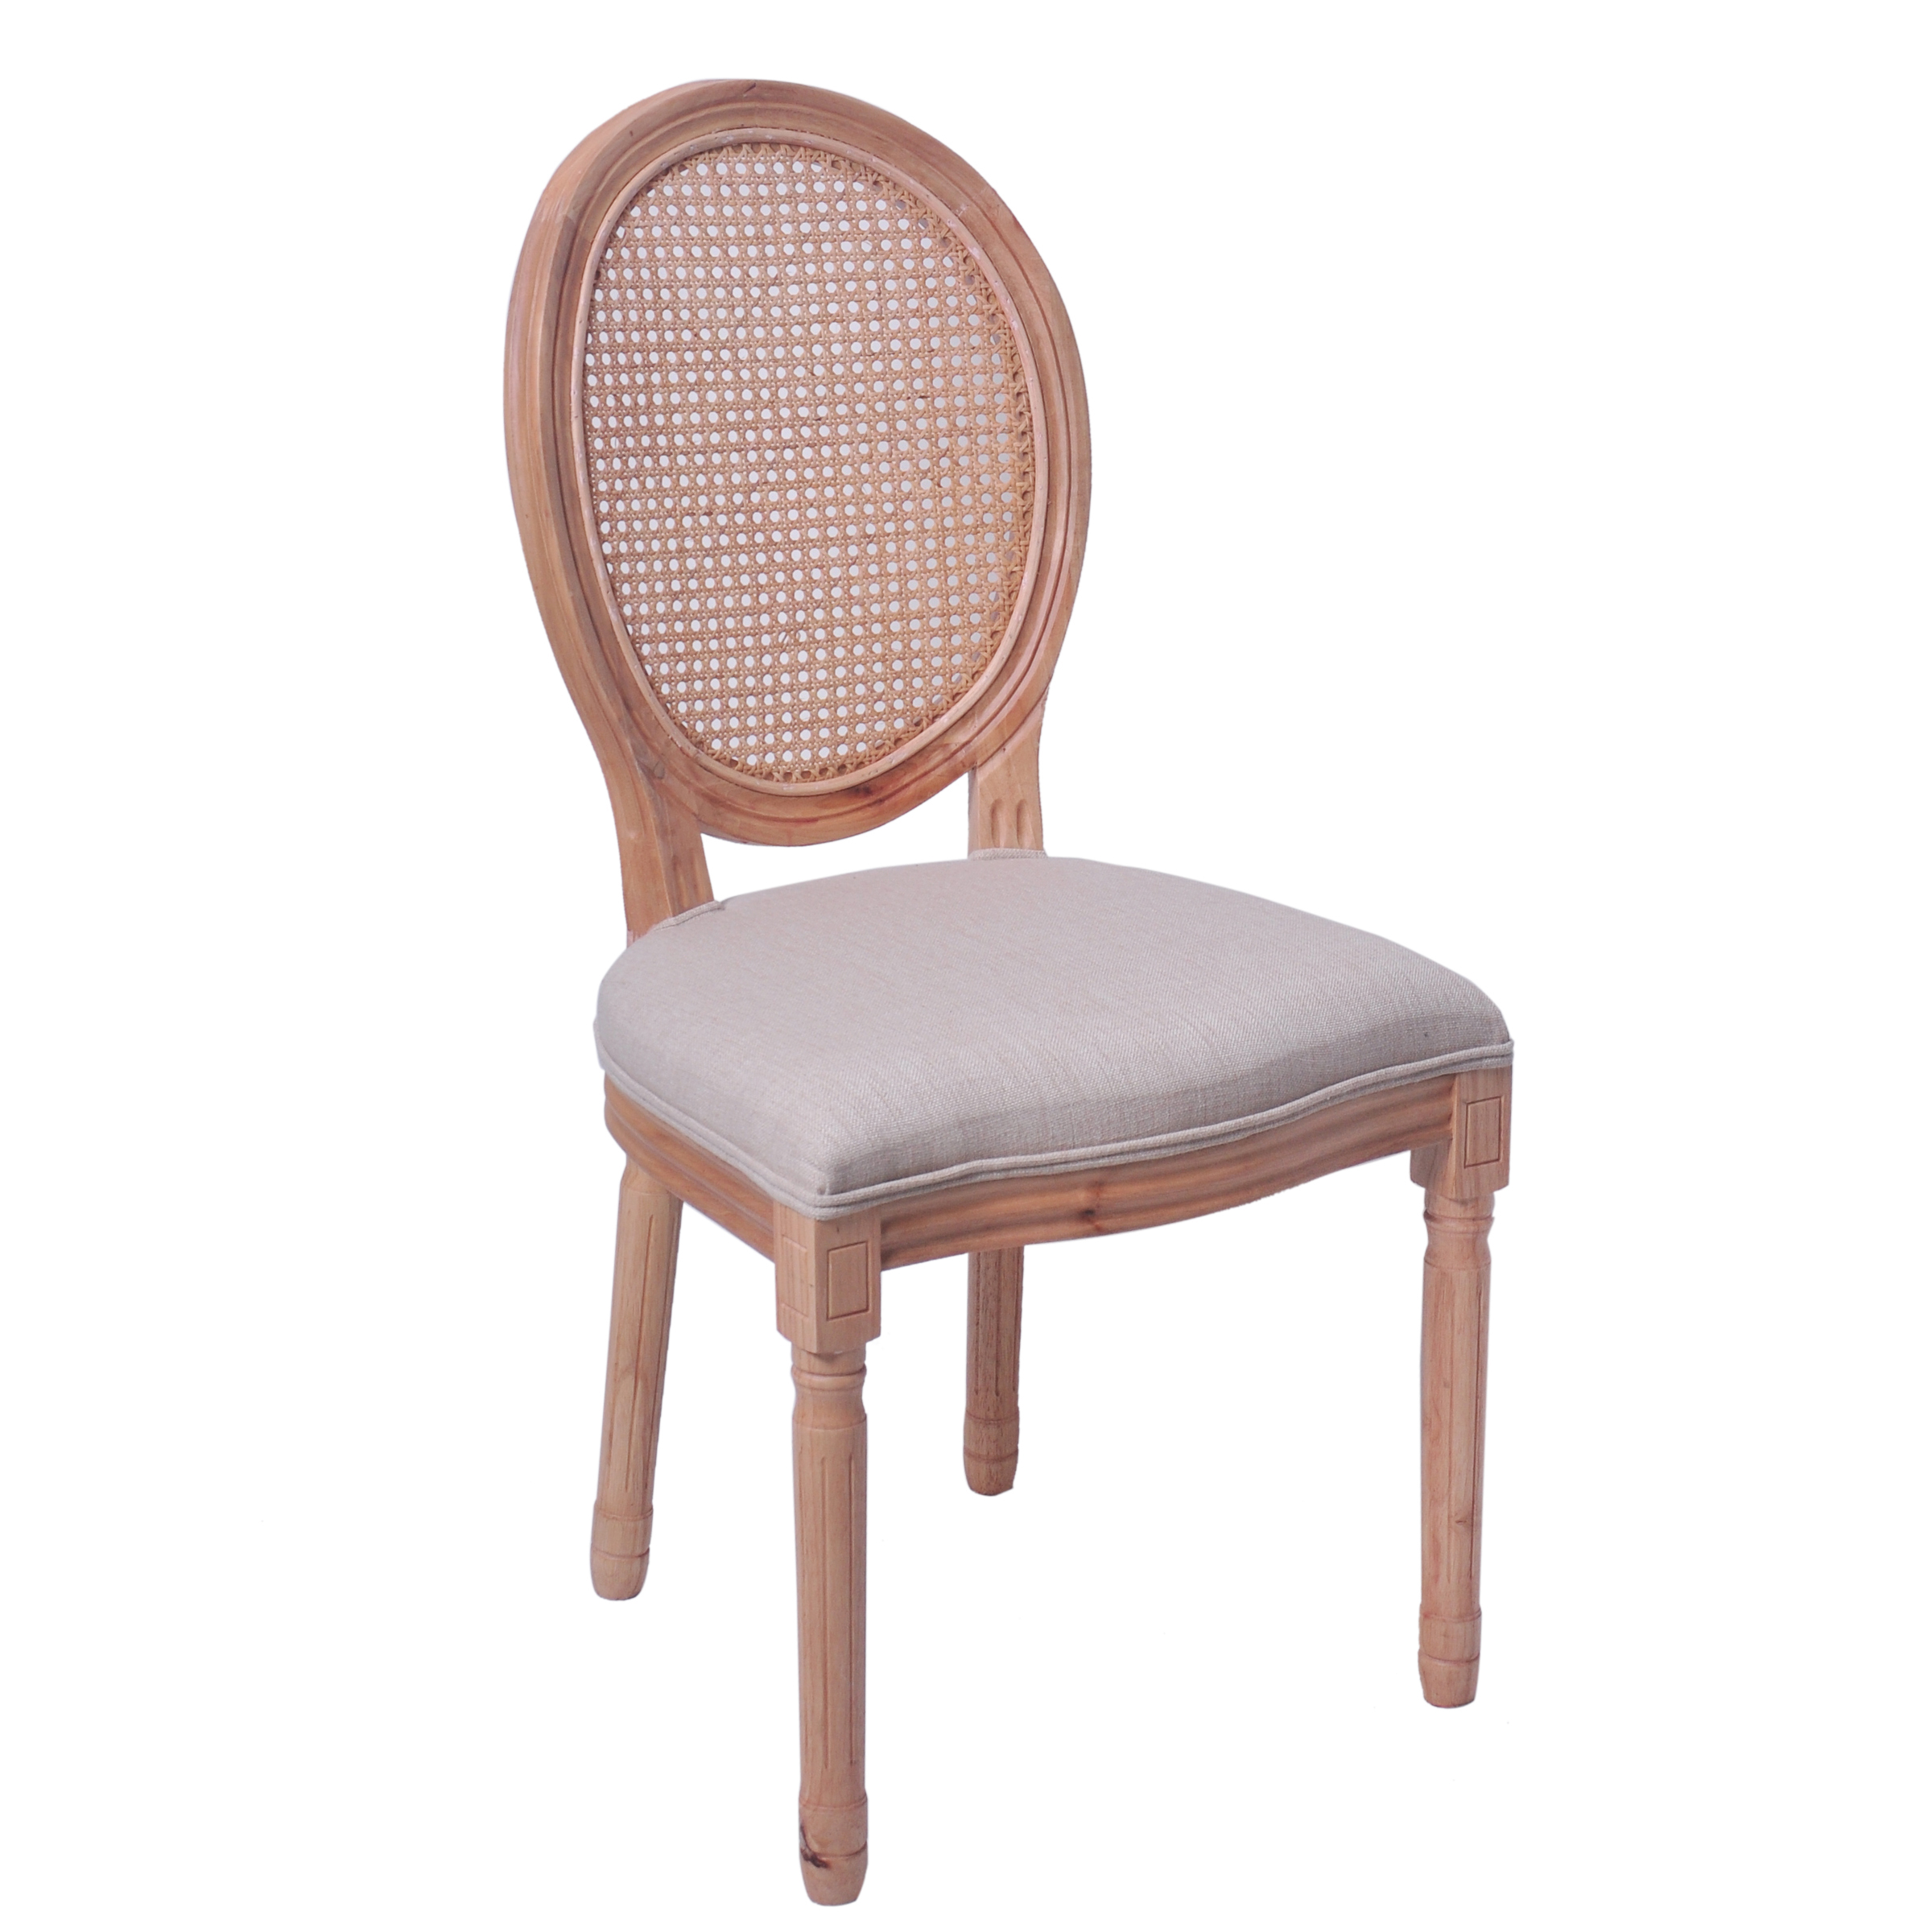 Wooden Louis Chair Fabric Seat And Rattan Back 